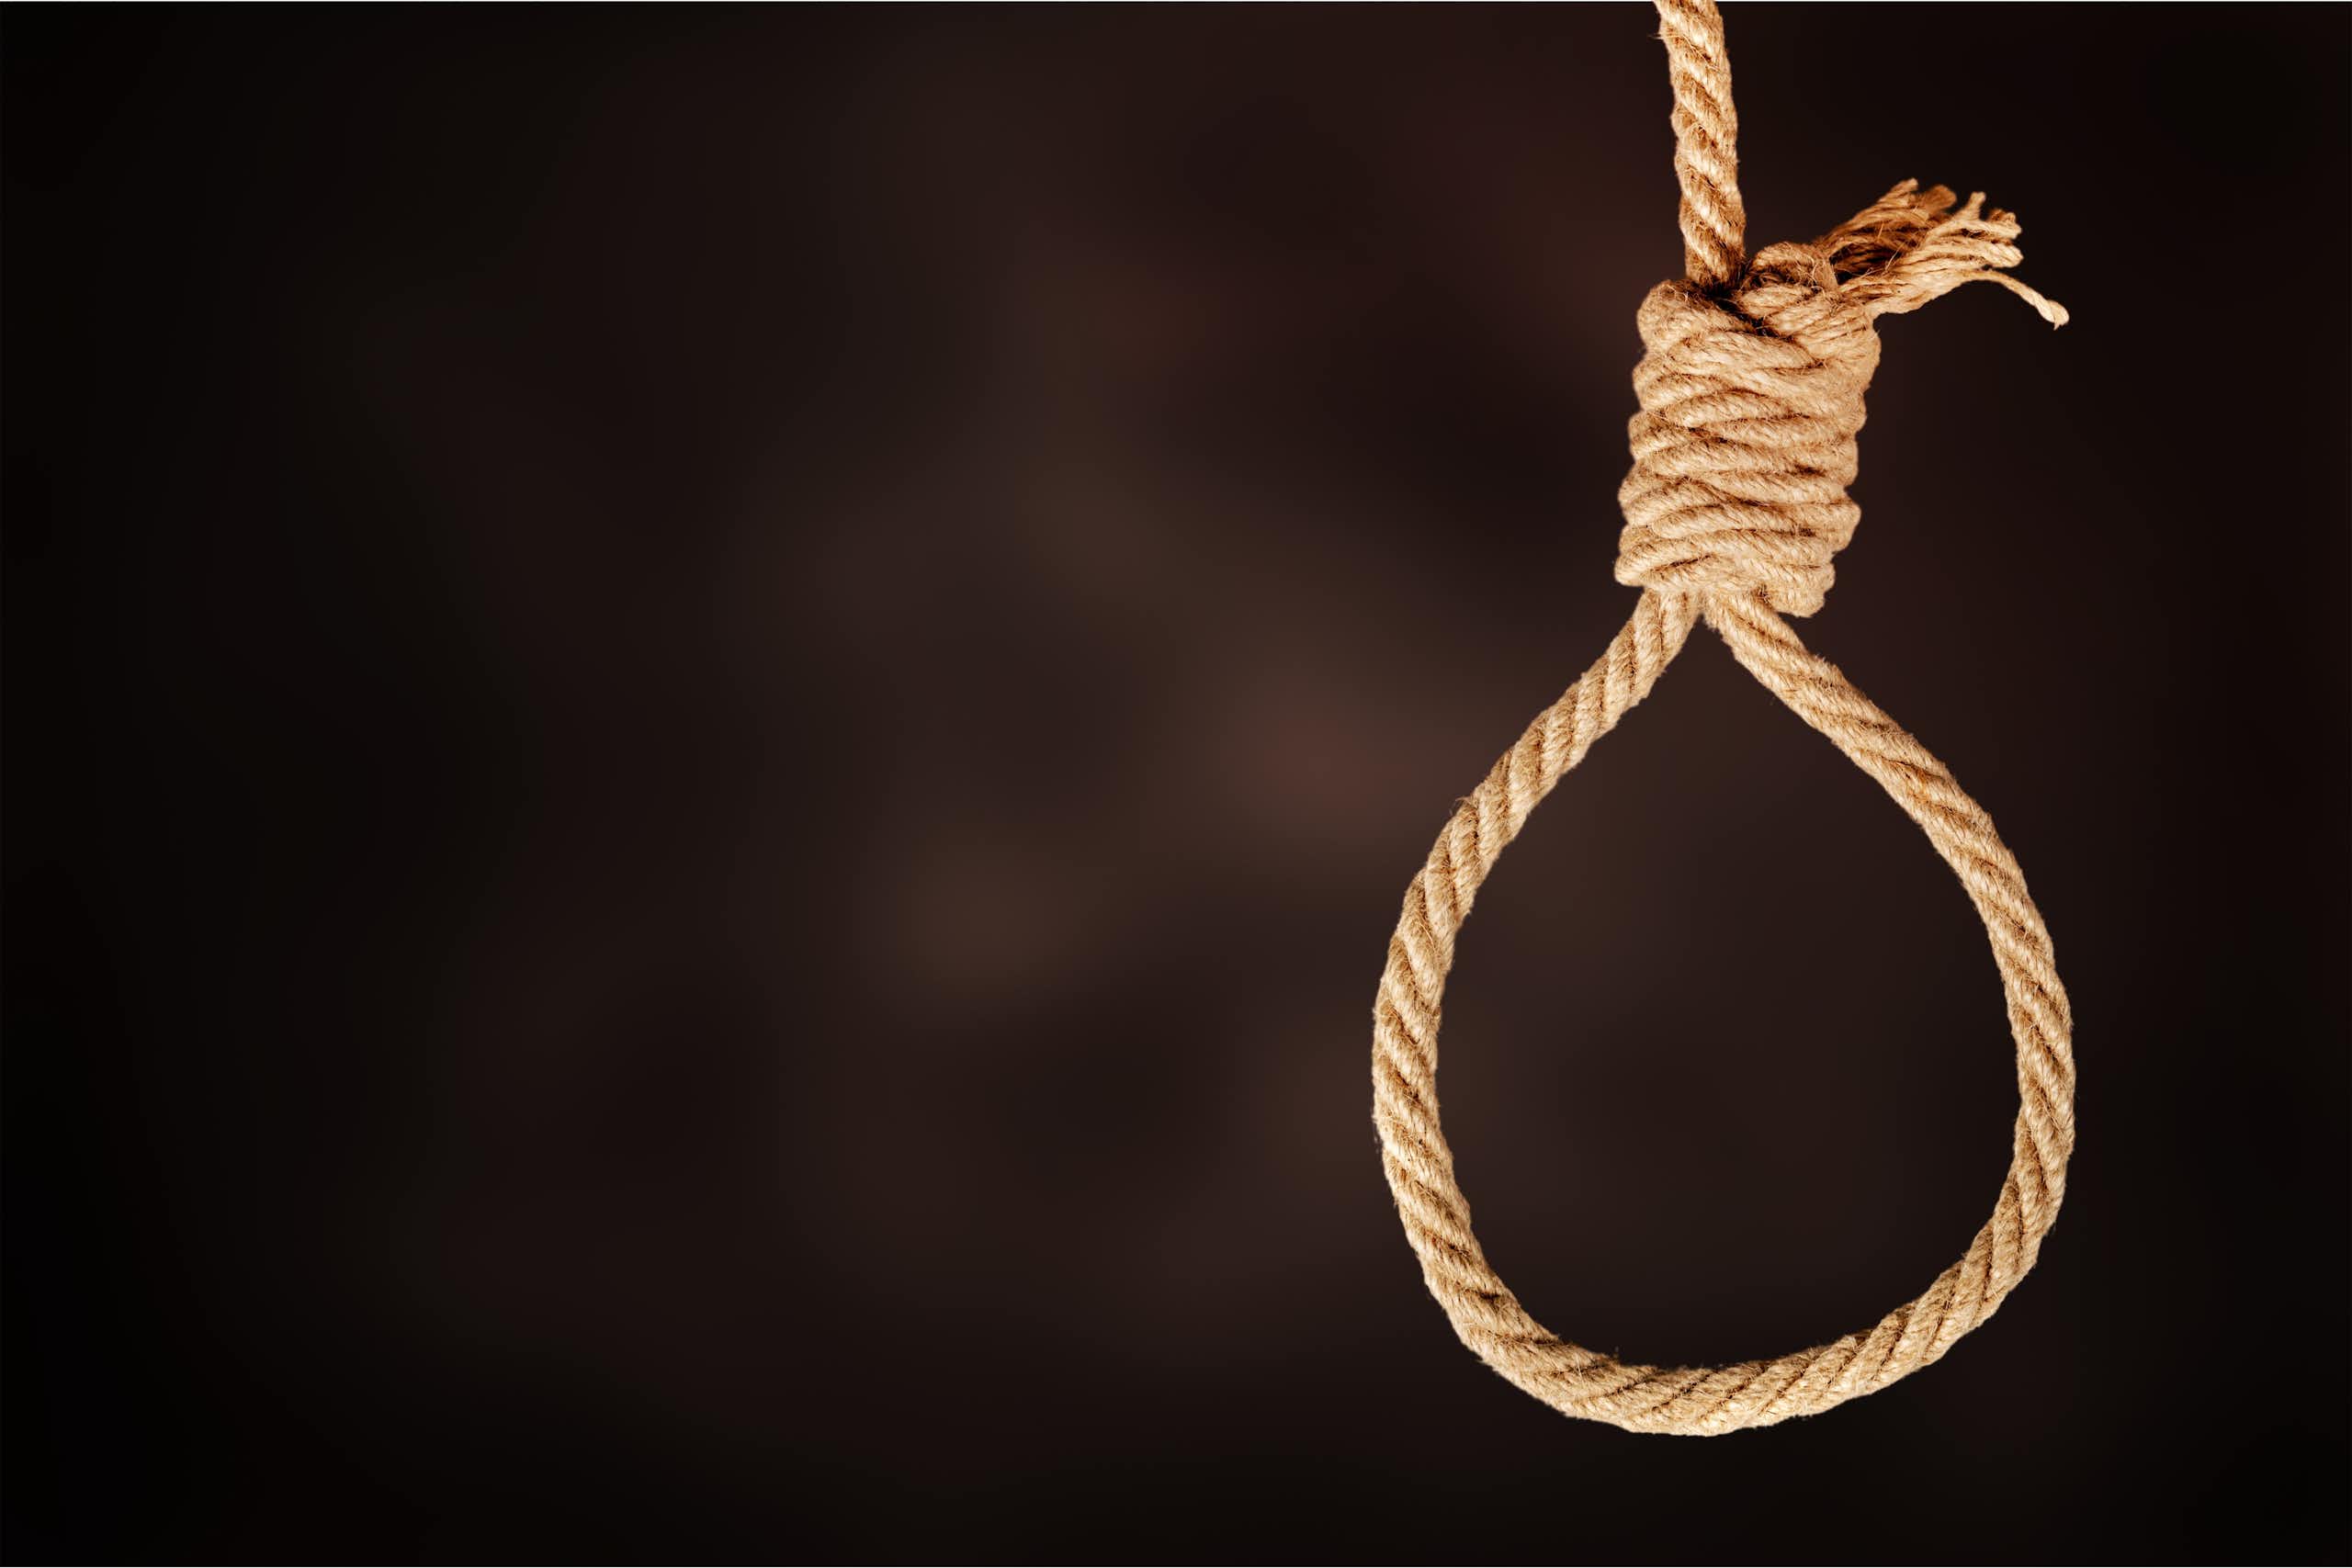 A rope noose photographed against a black background.